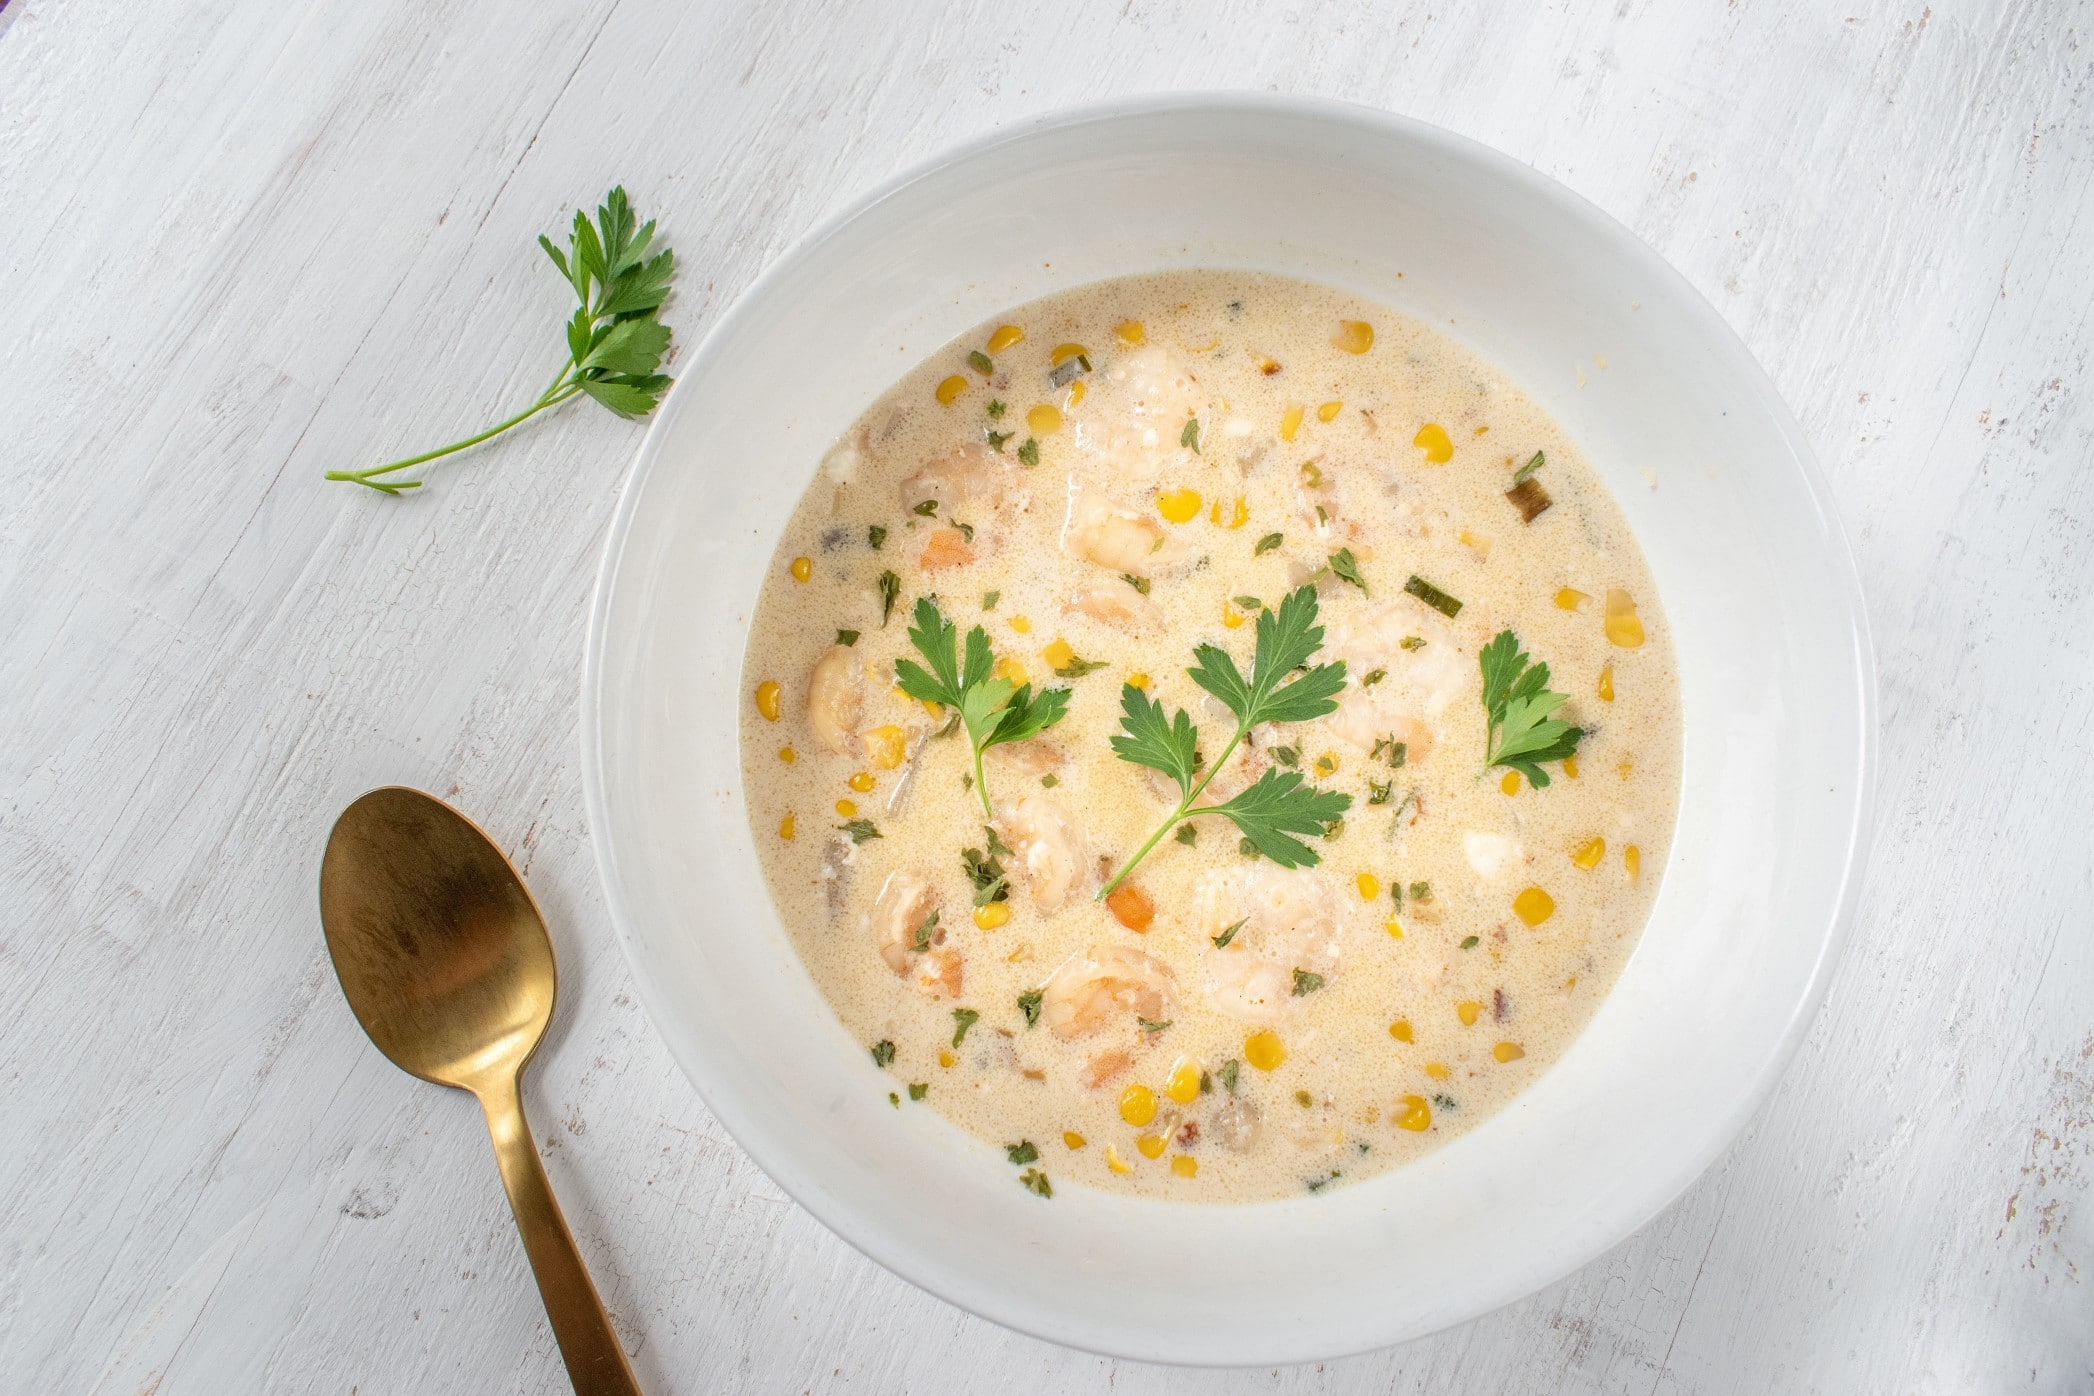 What To Serve With Corn Chowder: Sides & Compliments